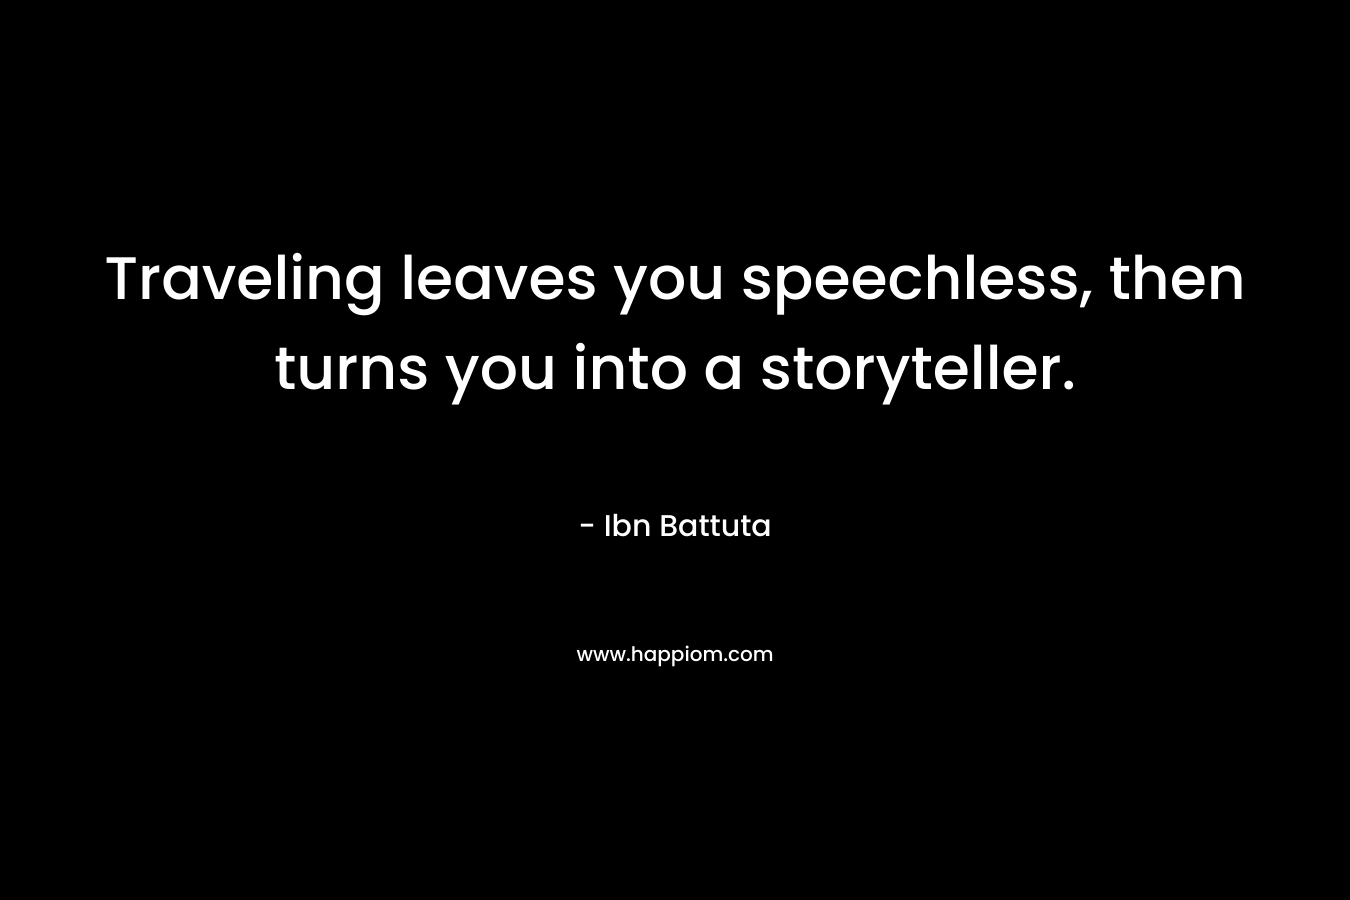 Traveling leaves you speechless, then turns you into a storyteller. – Ibn Battuta